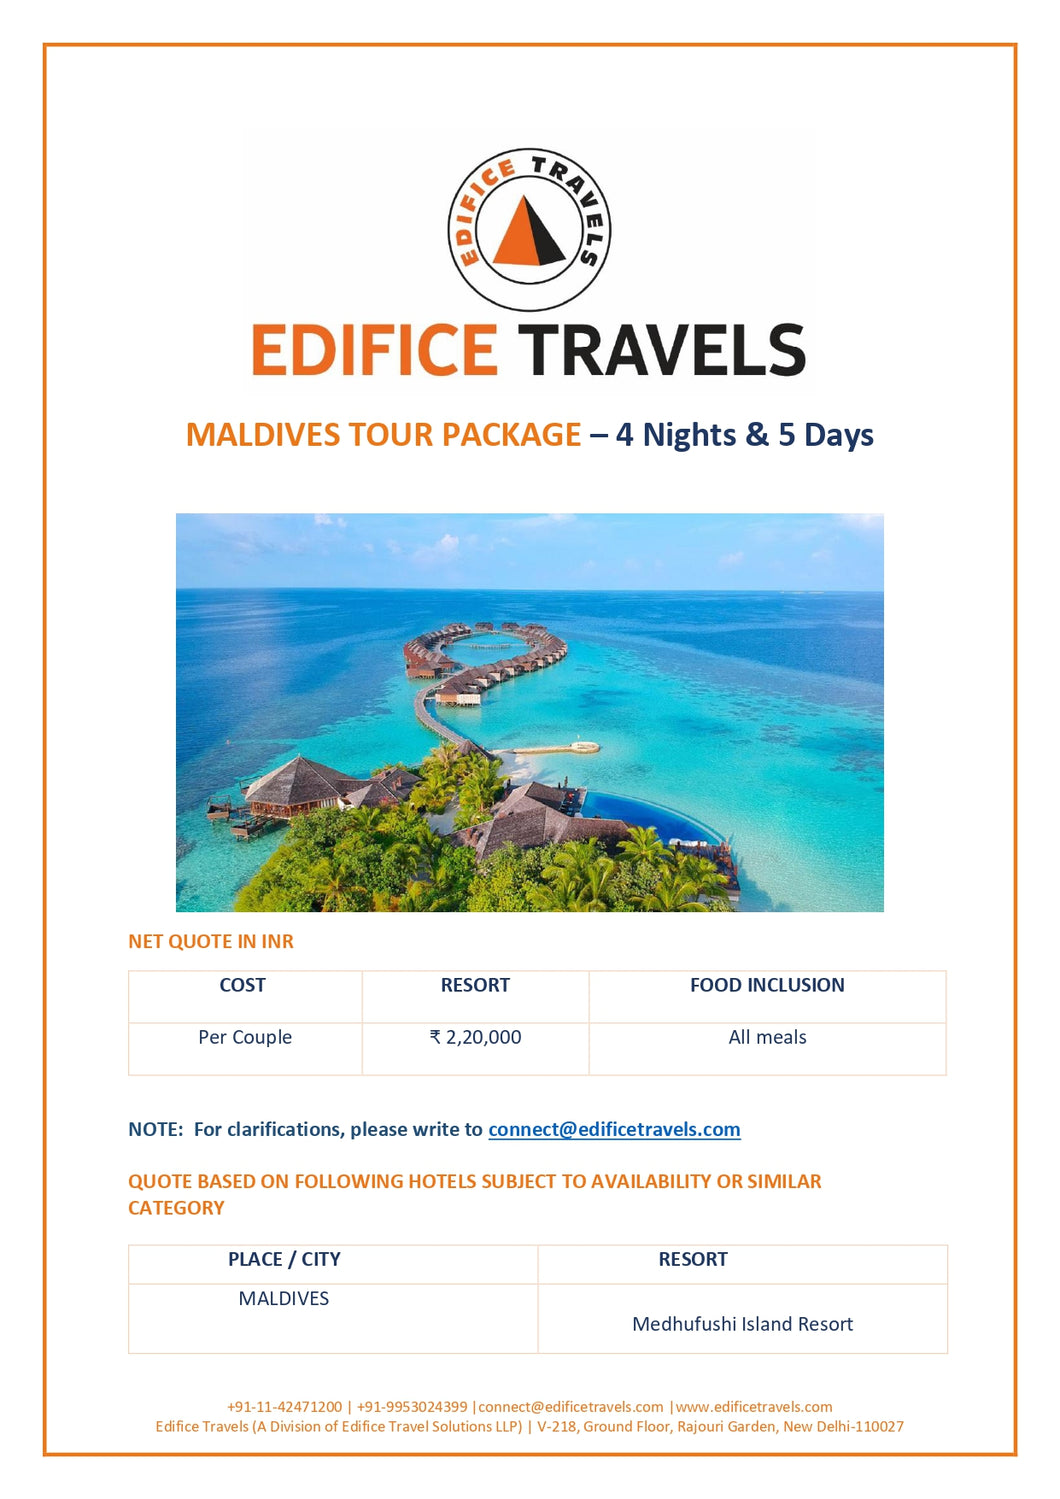 Maldives Tour Package - 4 Nights & 5 Days